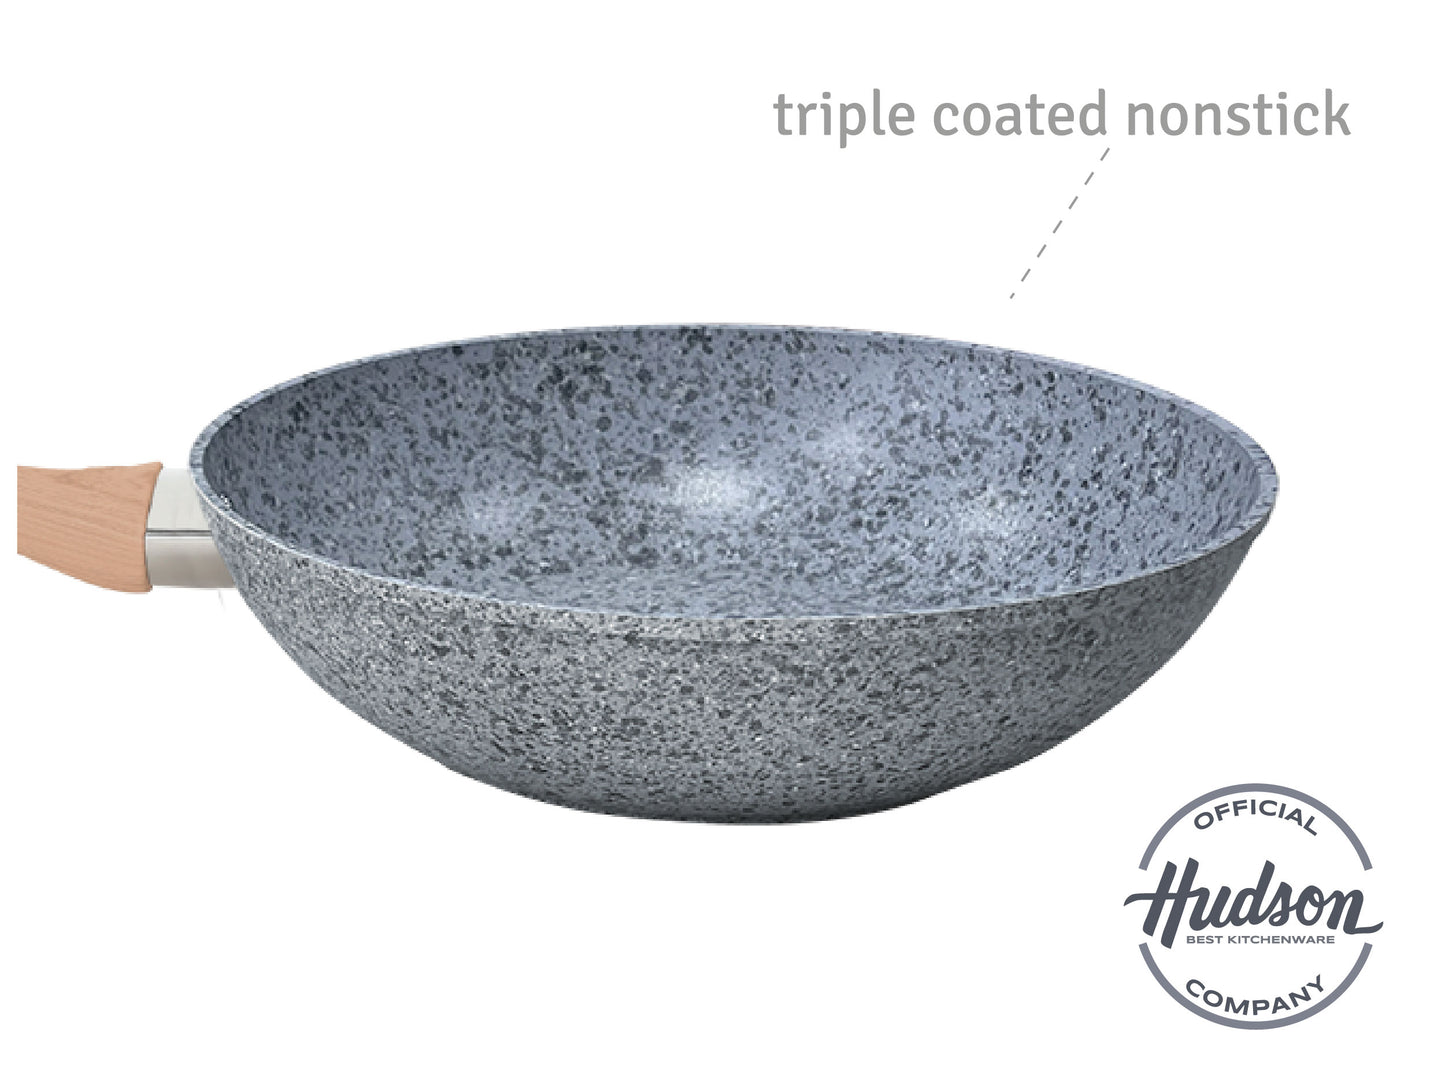 HUDSON Forged Aluminum Nonstick Covered Wok, 4.1Qt ,11 inches